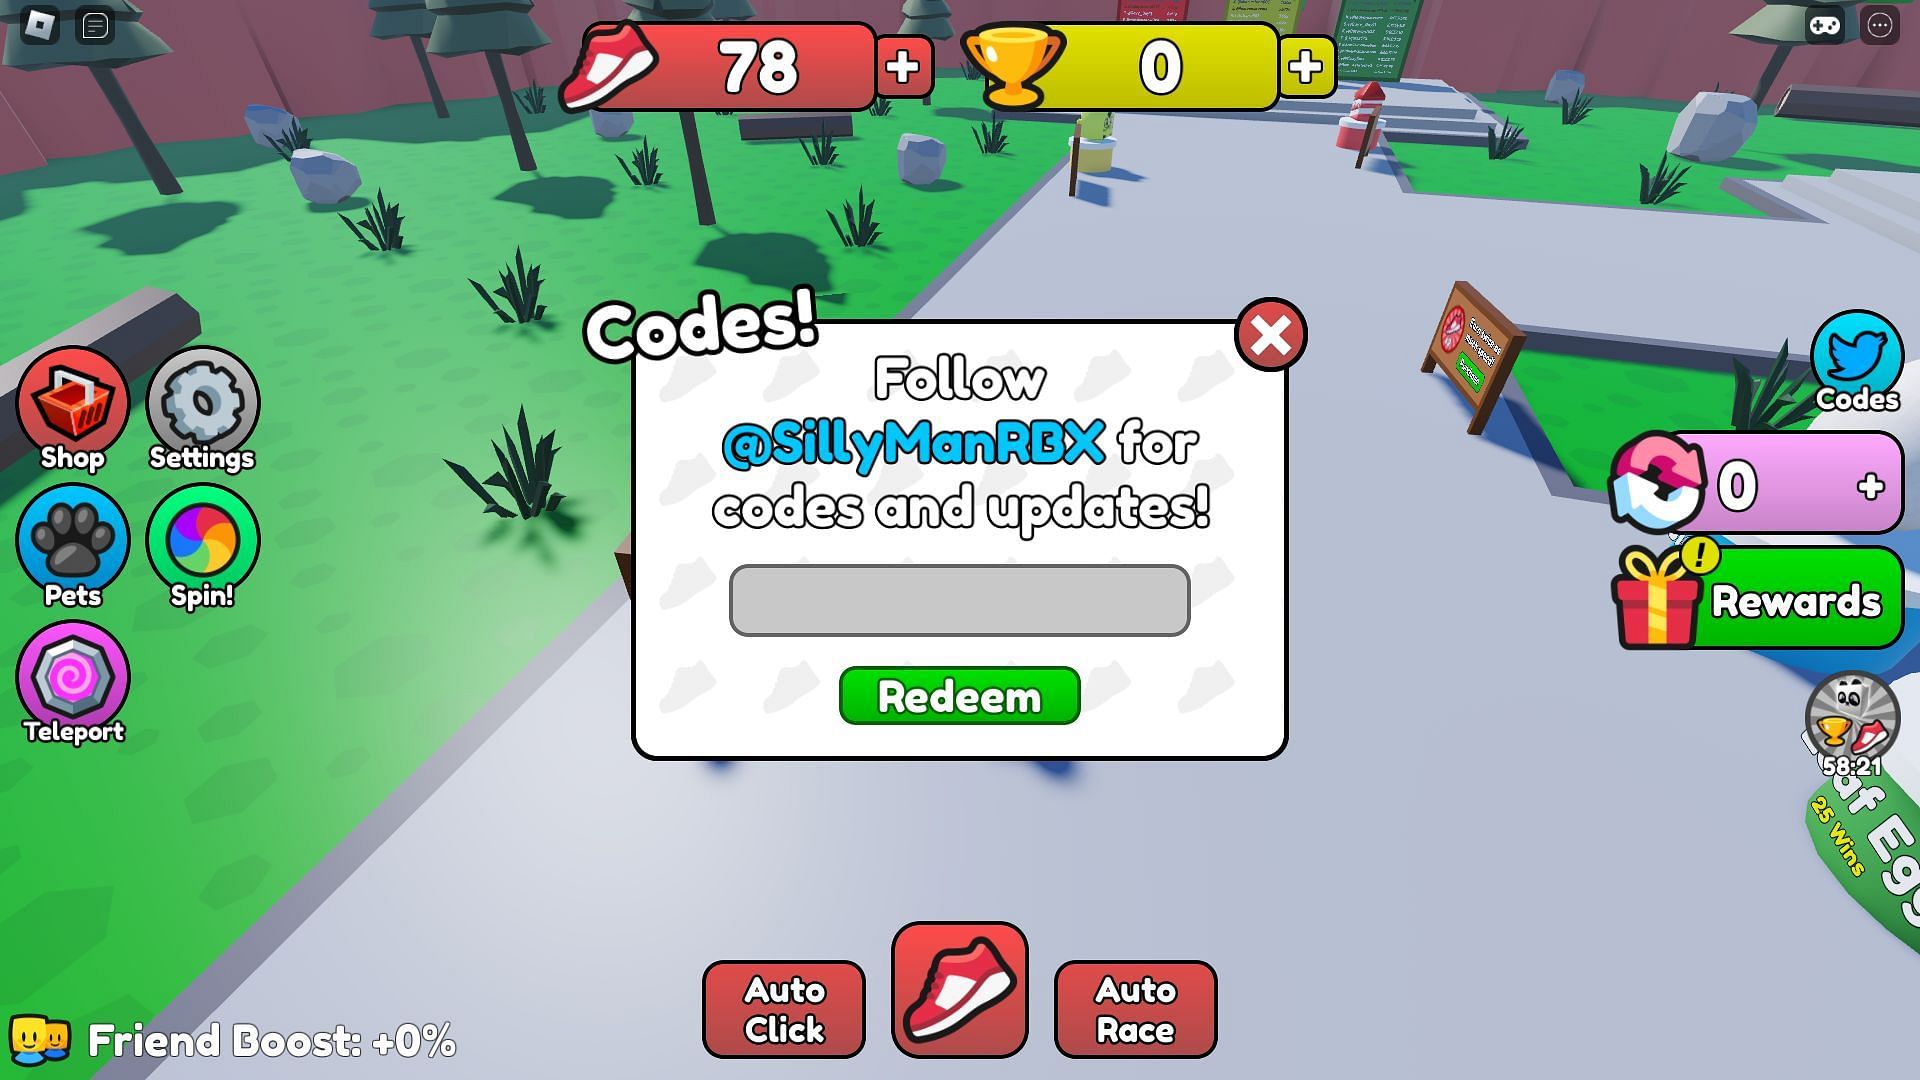 Active codes for Catch Me If You Can (Image via Roblox)